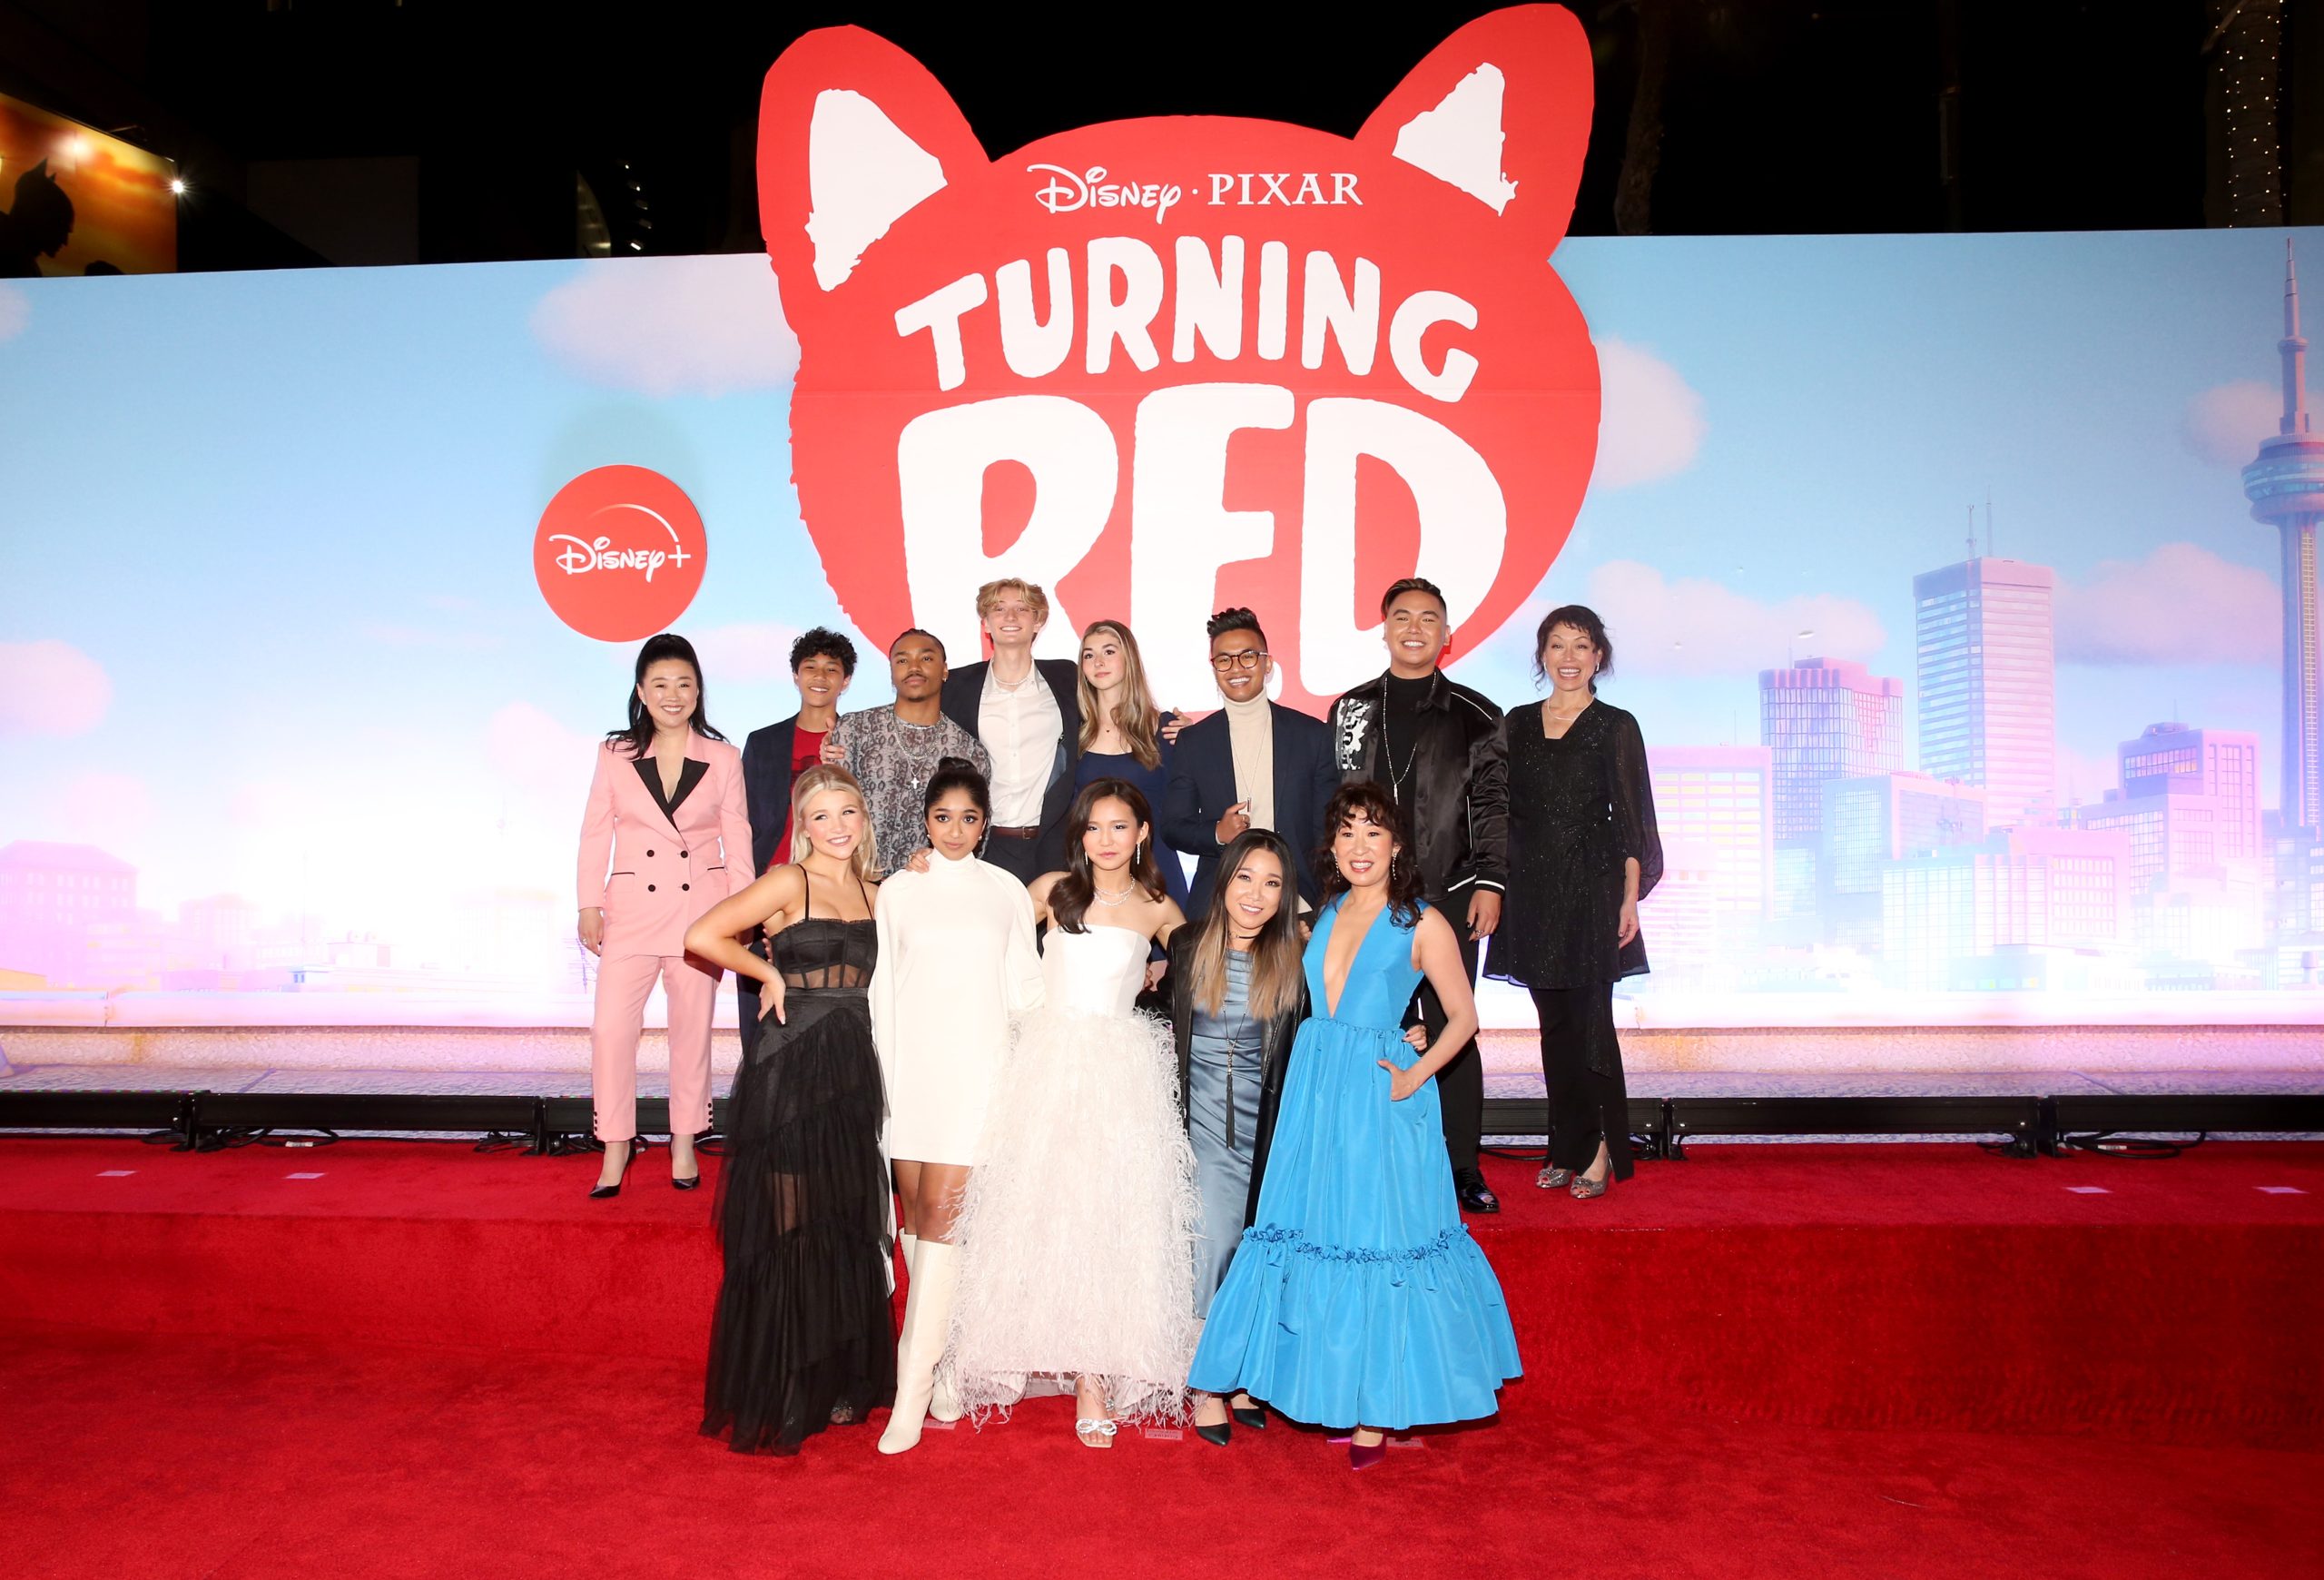 Red Carpet Pics: DISNEY AND PIXAR’S “TURNING RED” WORLD PREMIERE